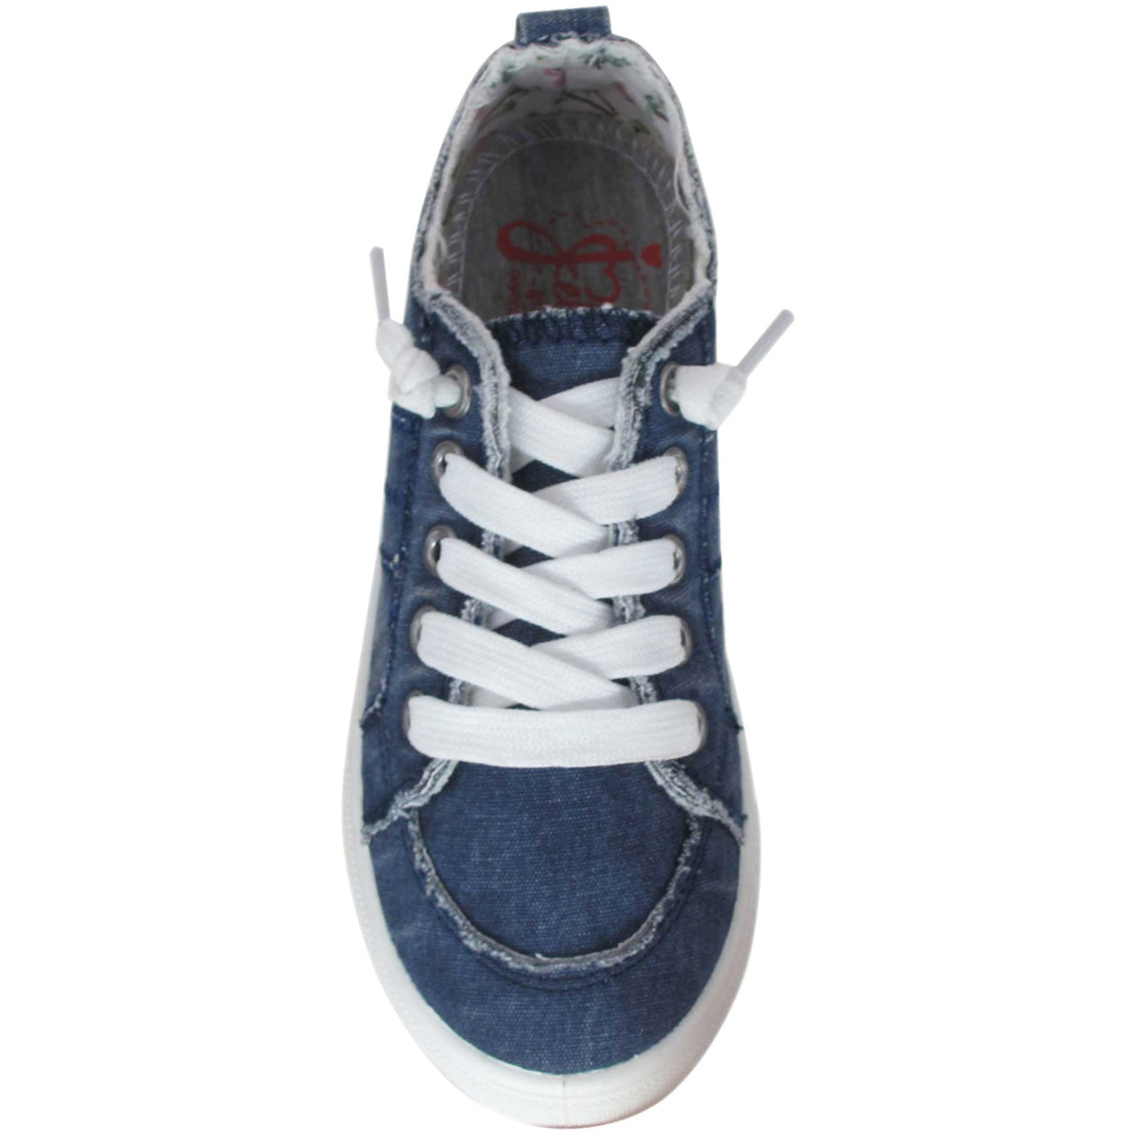 Jellypop Kory Sneakers | Sneakers | Shoes | Shop The Exchange